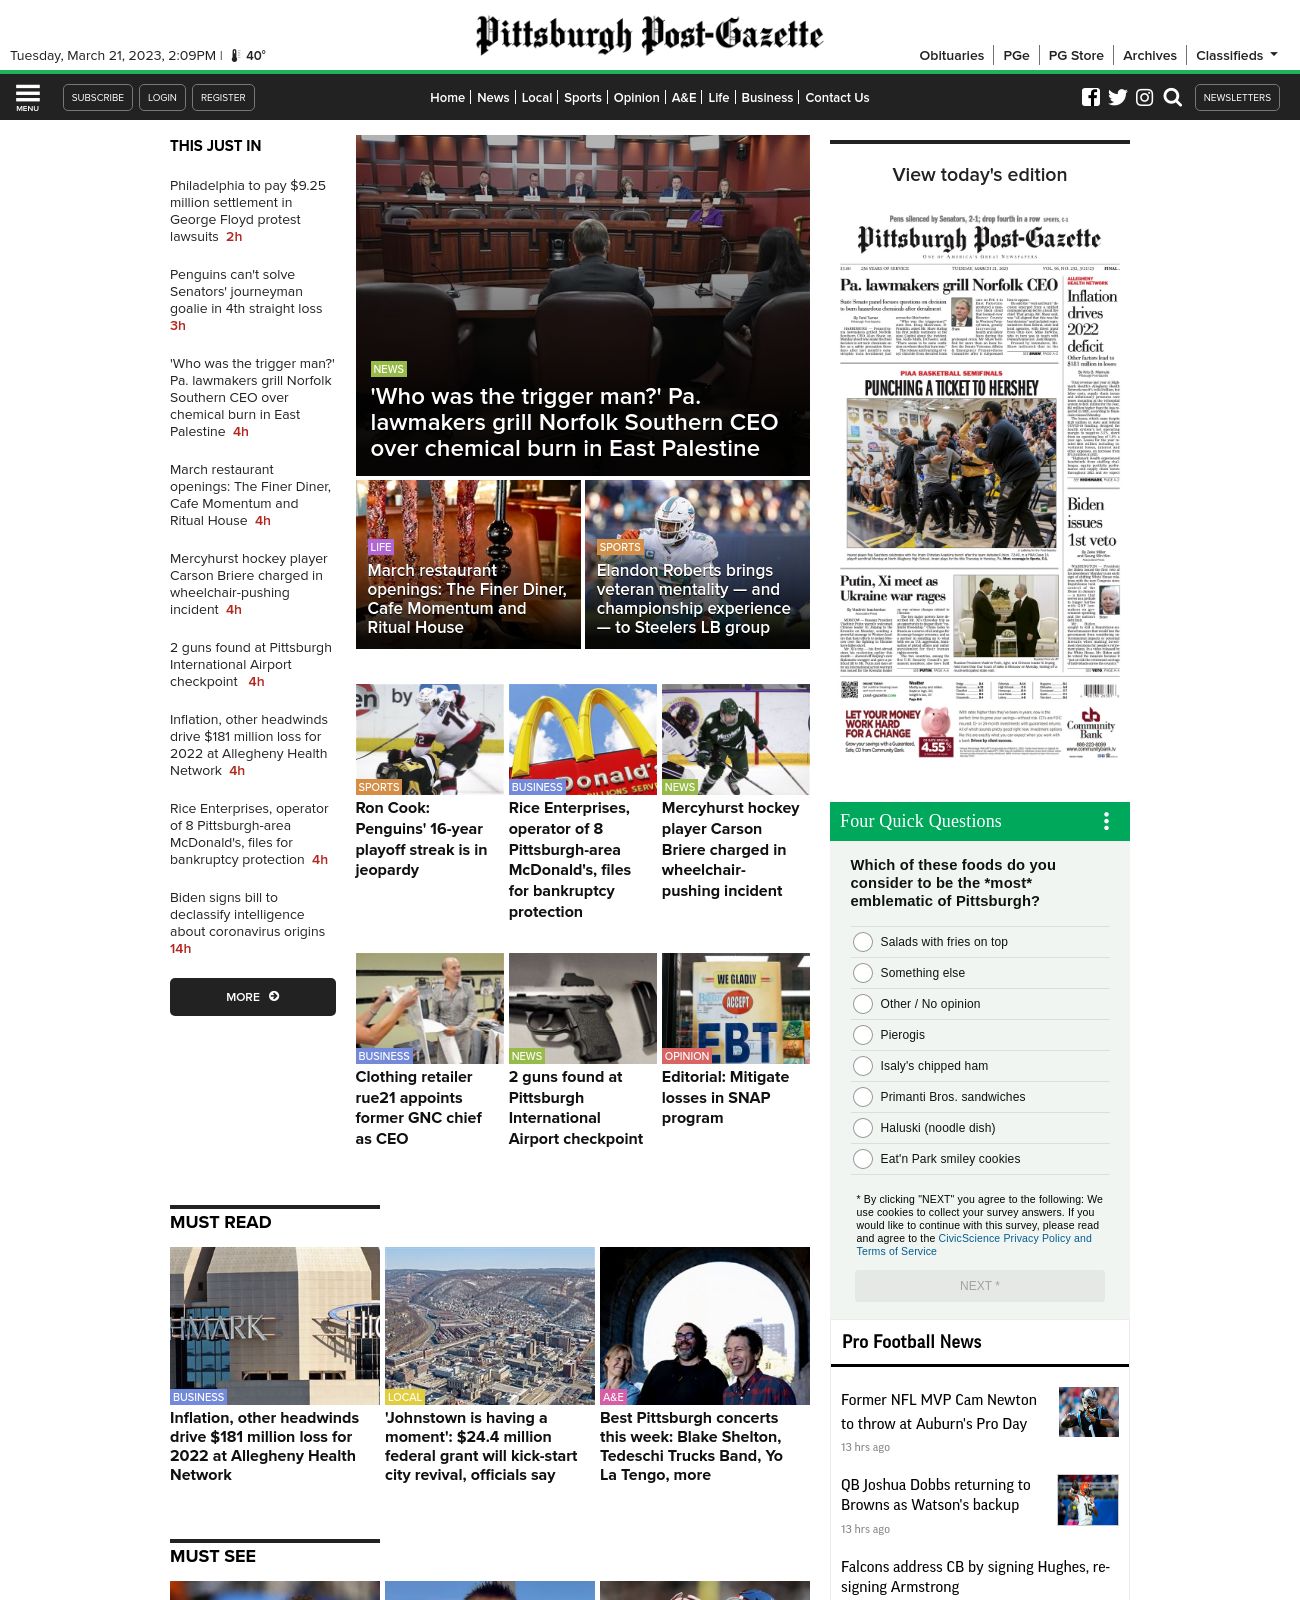 Pittsburgh Post-Gazette at 2023-03-21 10:23:44-04:00 local time